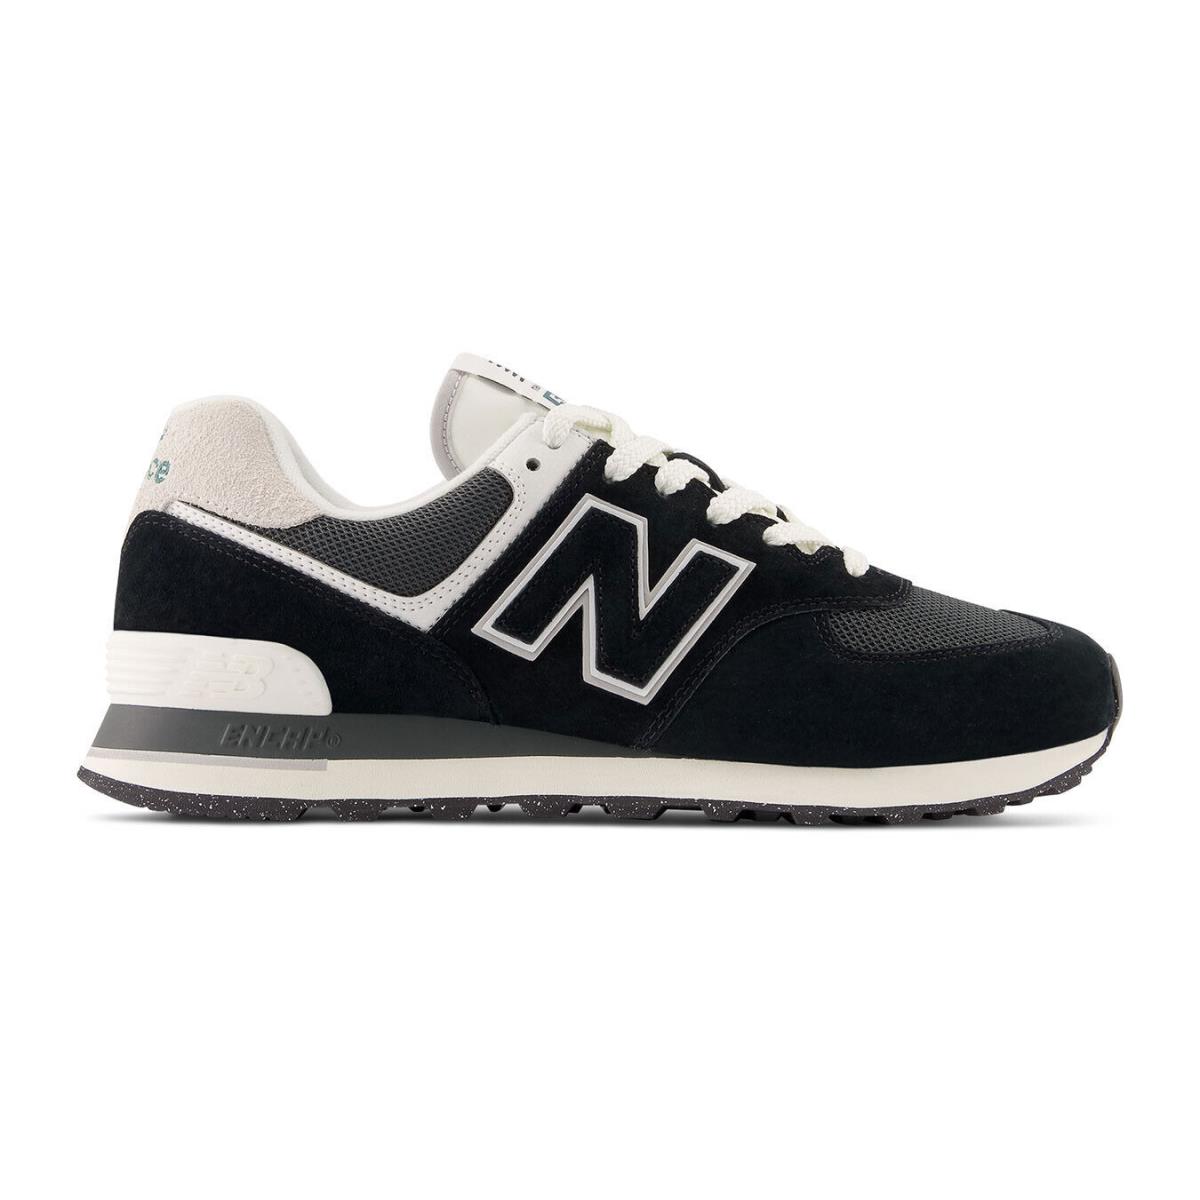 New Balance 574 Black White U574GO2 NB Mens Running Shoes Casual Sneakers